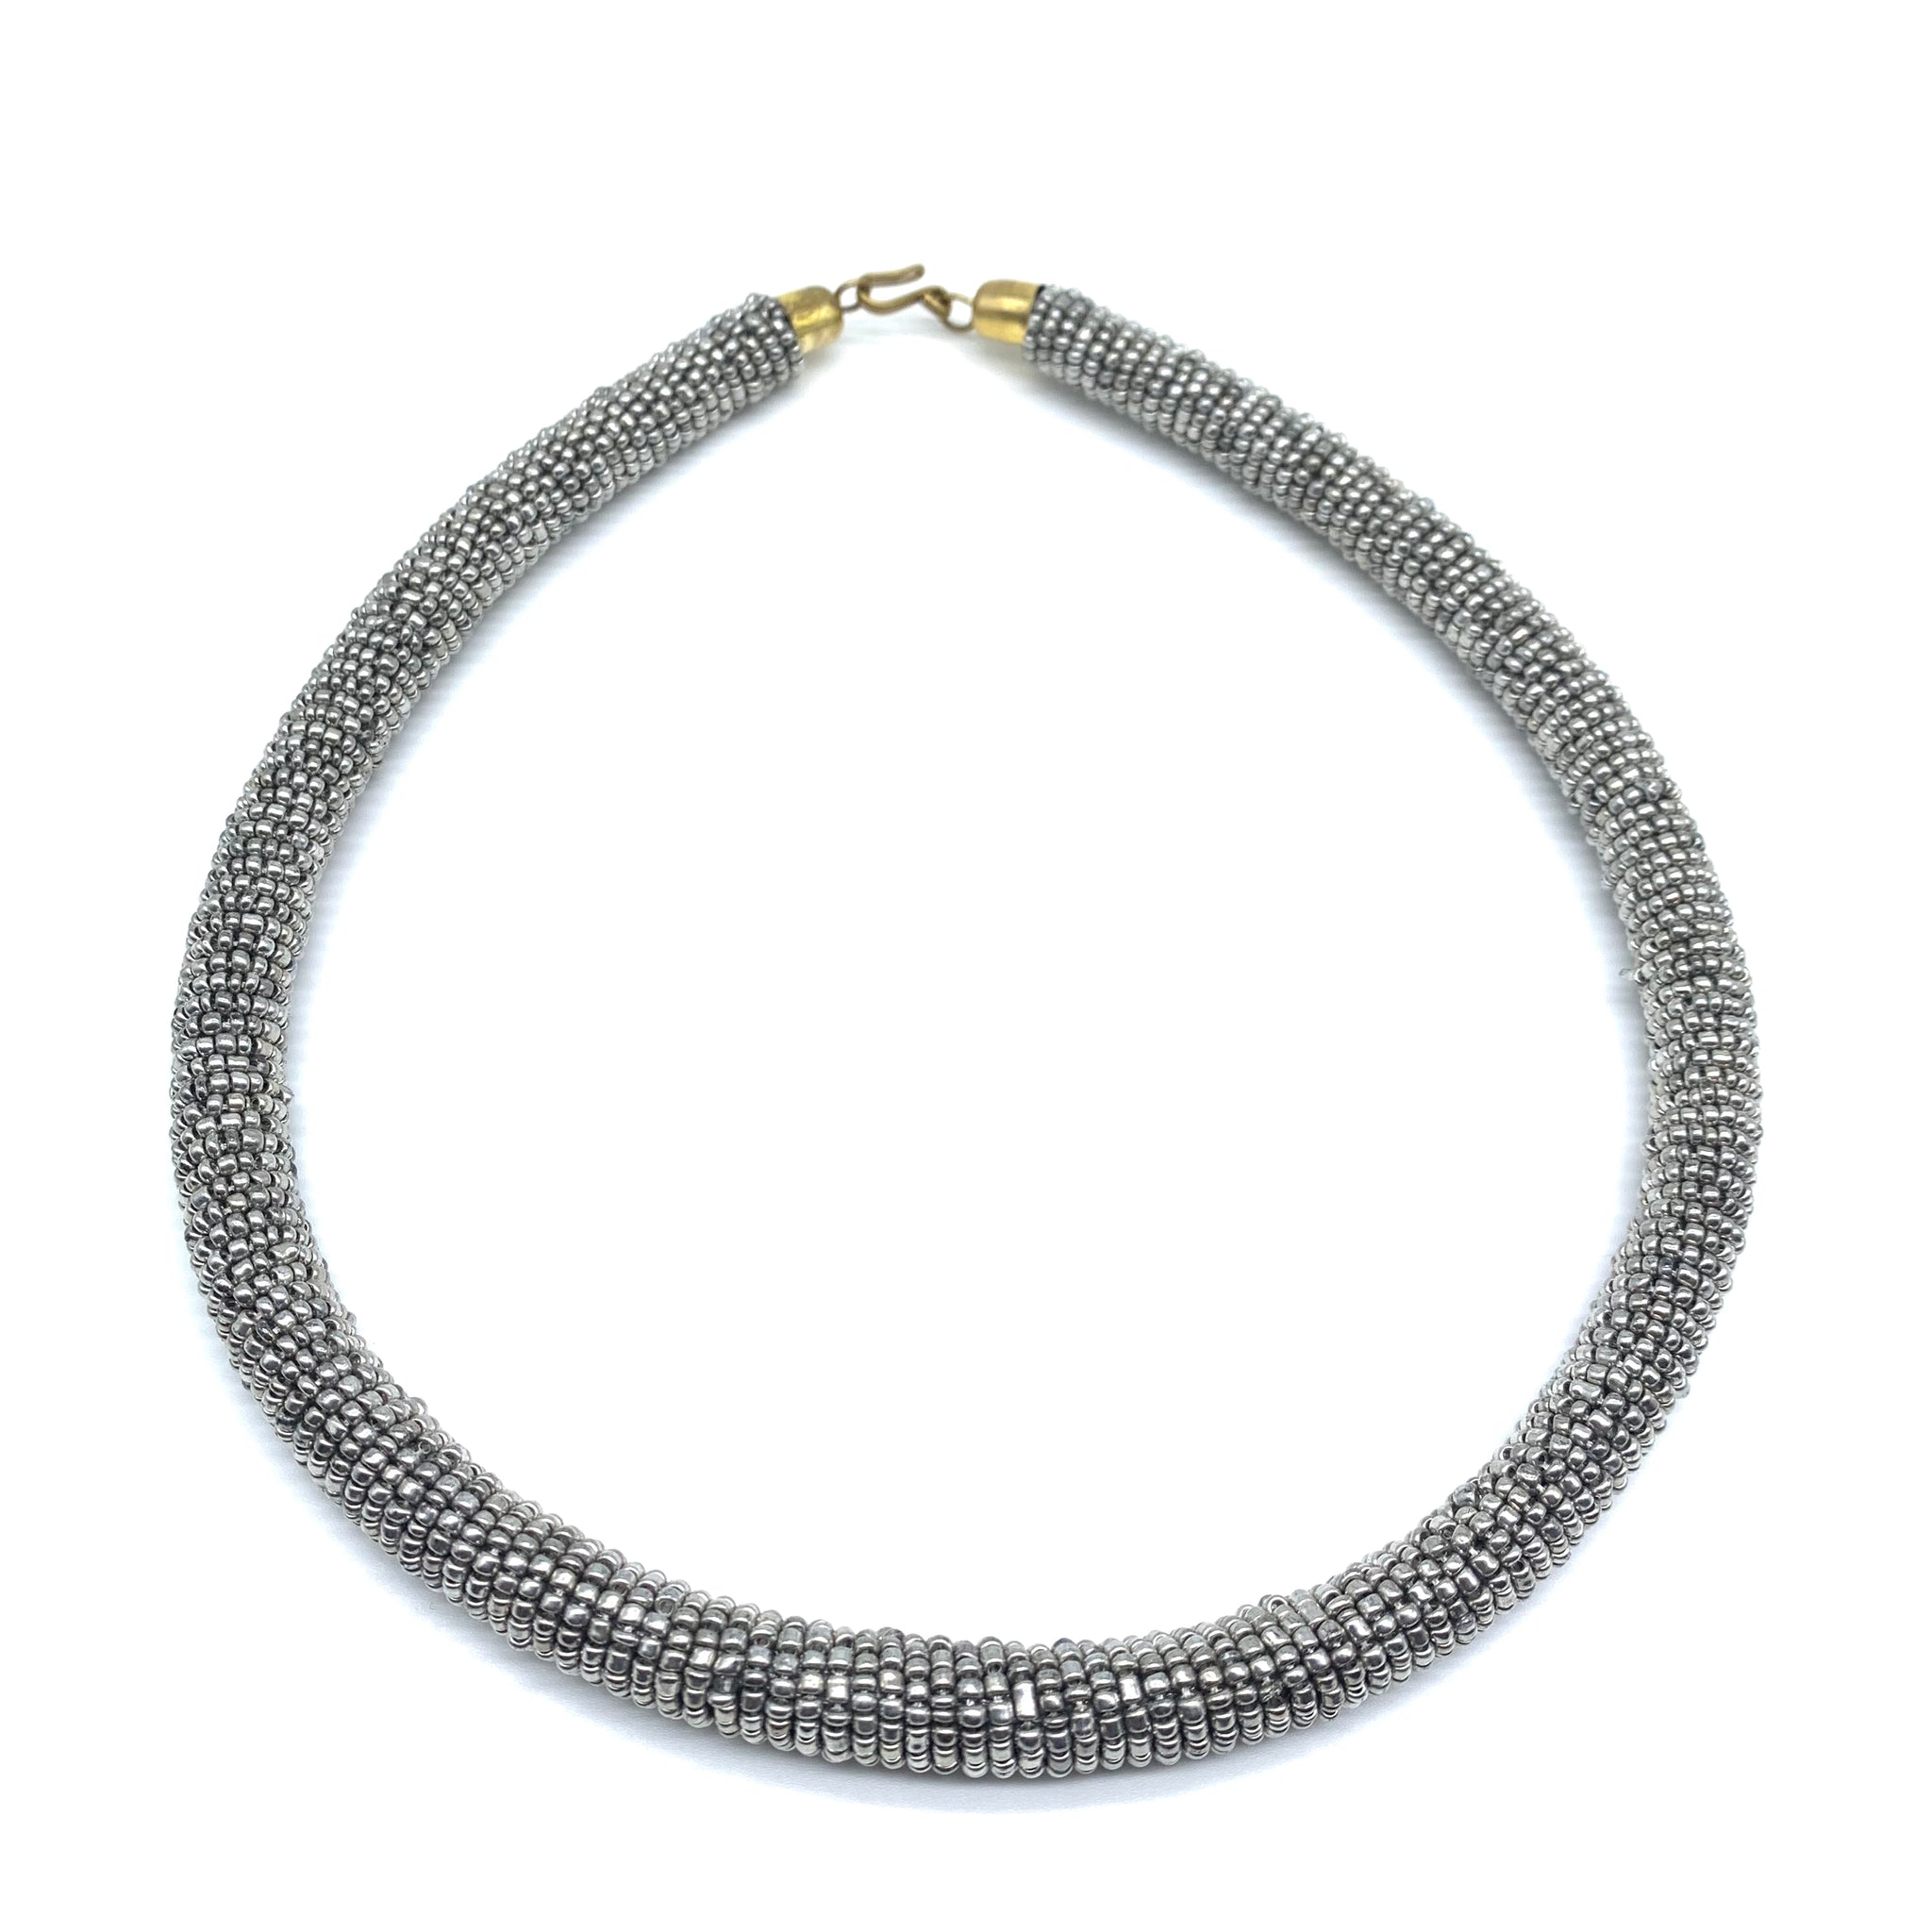 Bead Bangle Necklace-Silver Variation